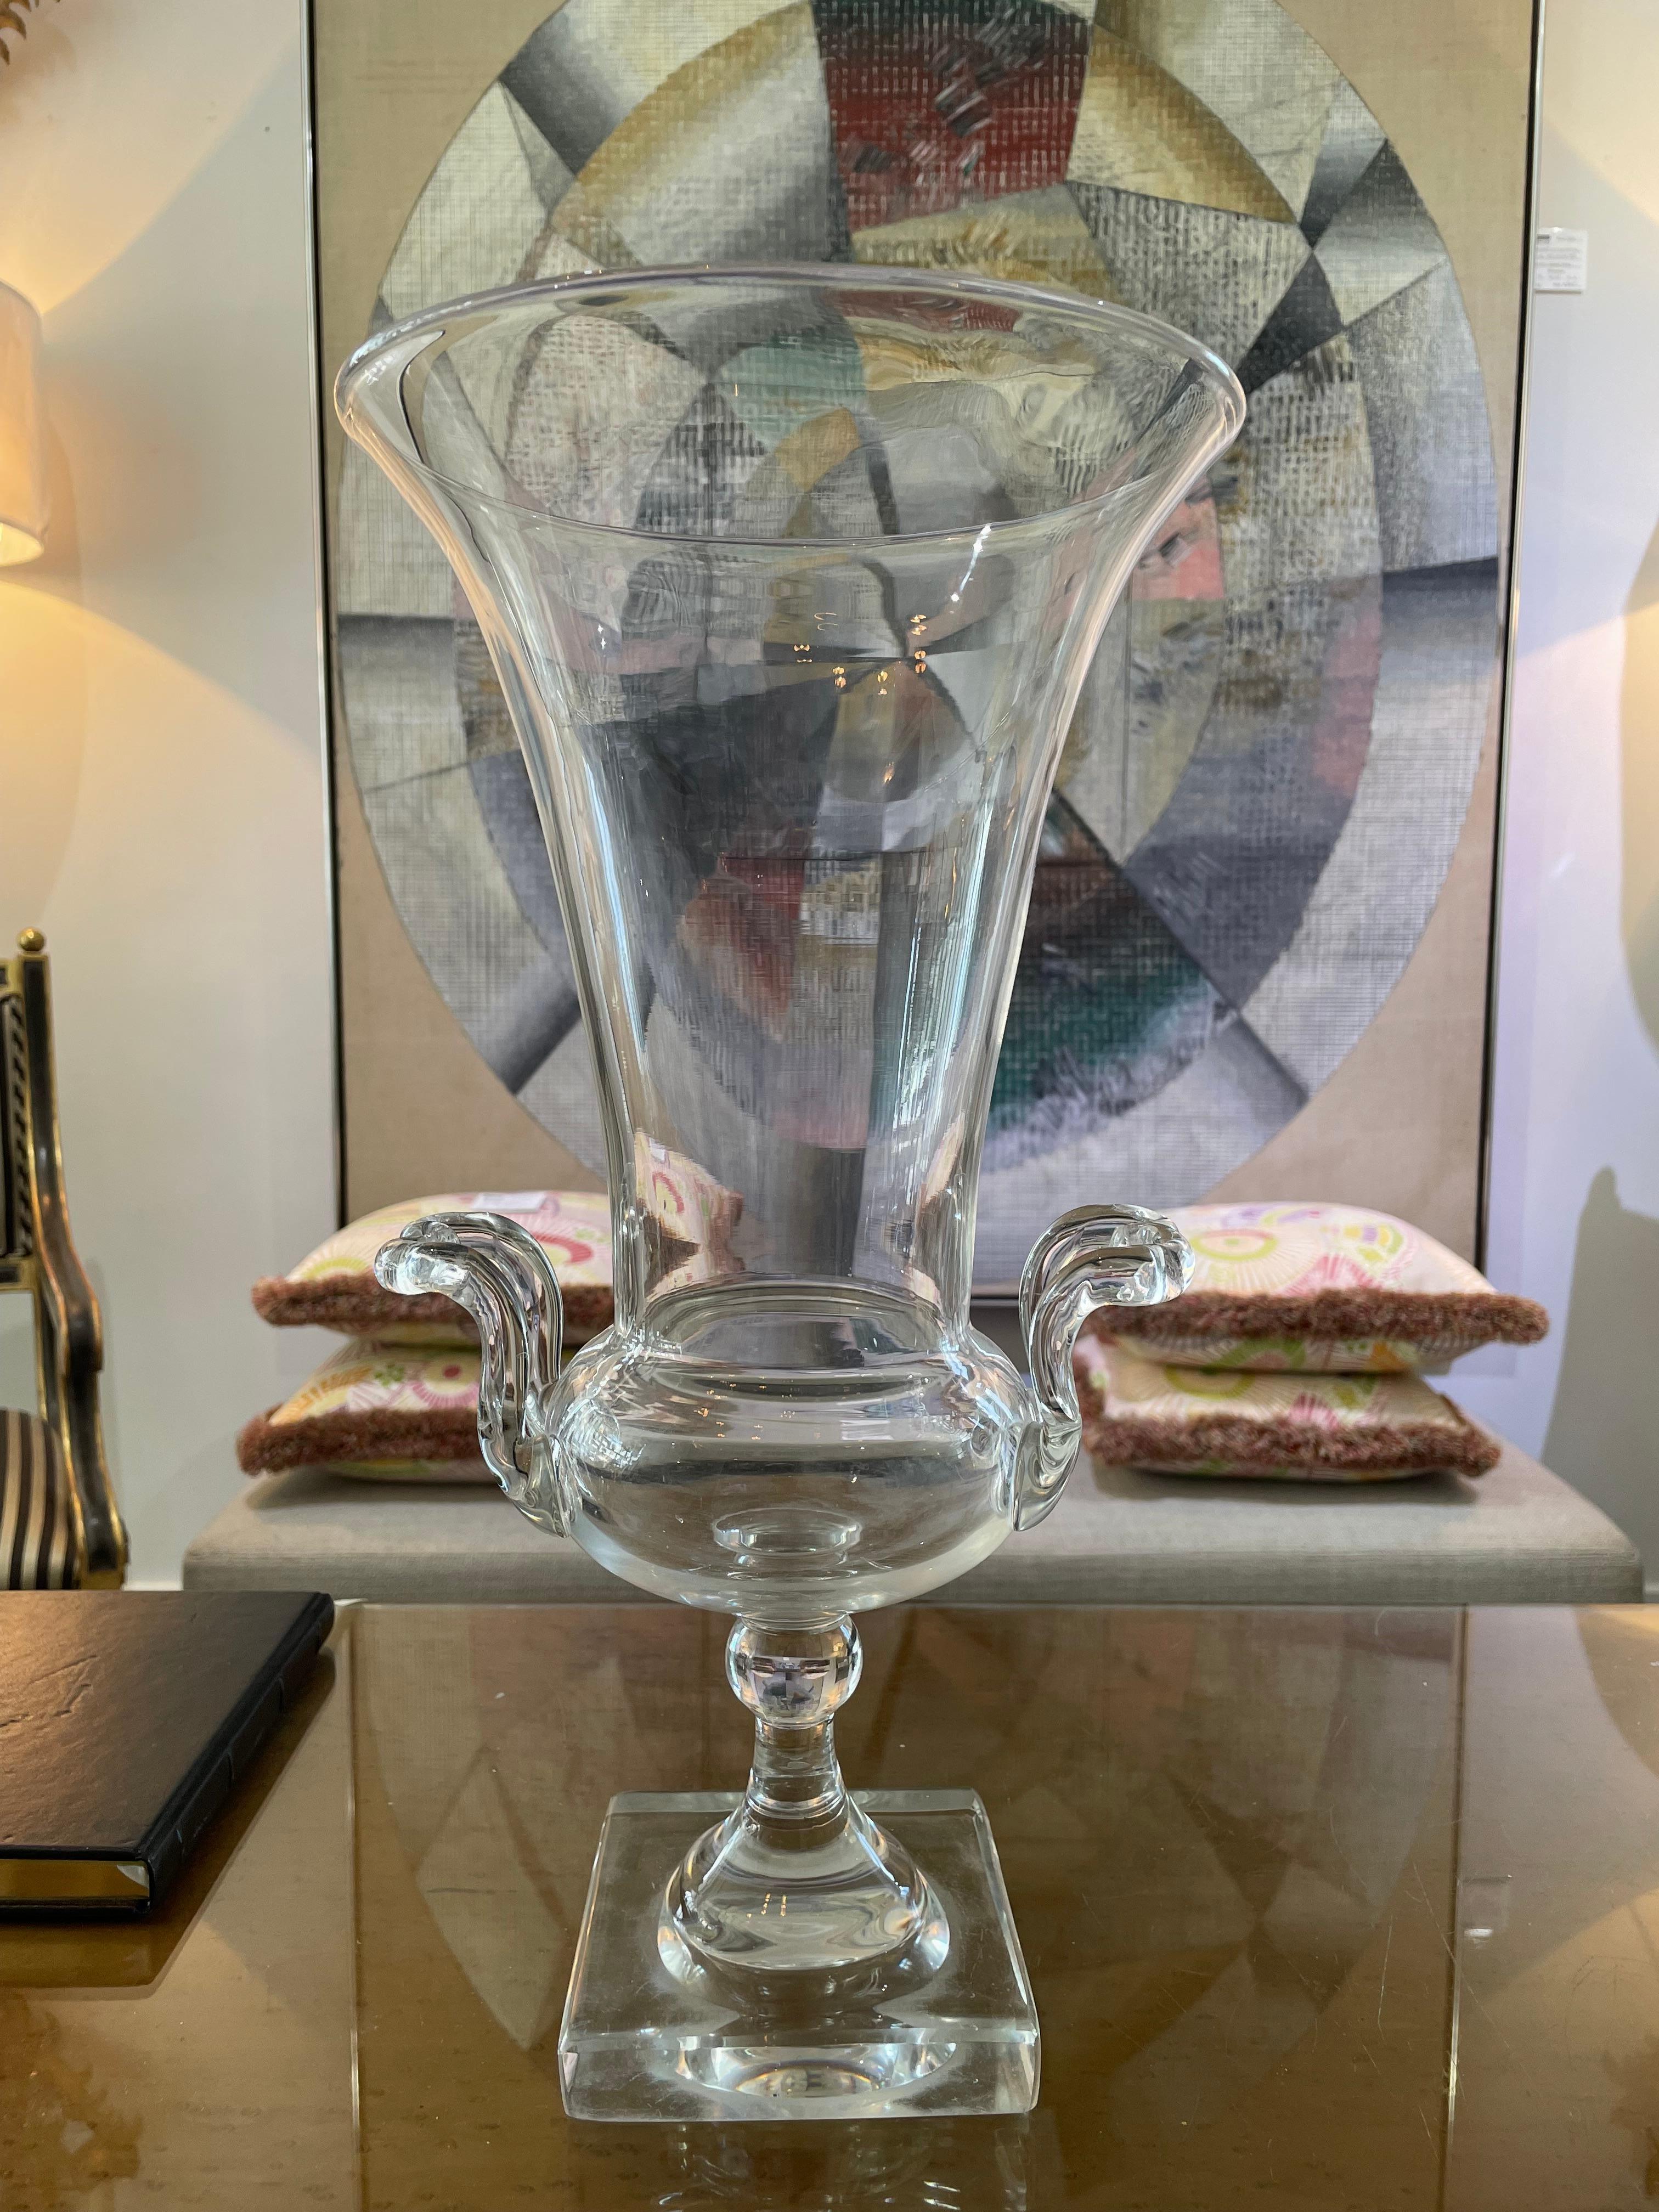 This stylish, artisan glass trophy-form vase dates to the 1930s-1940s.

Note:  There are surface abrasions on the verso of the base and also in the bowl of the vase (see images).